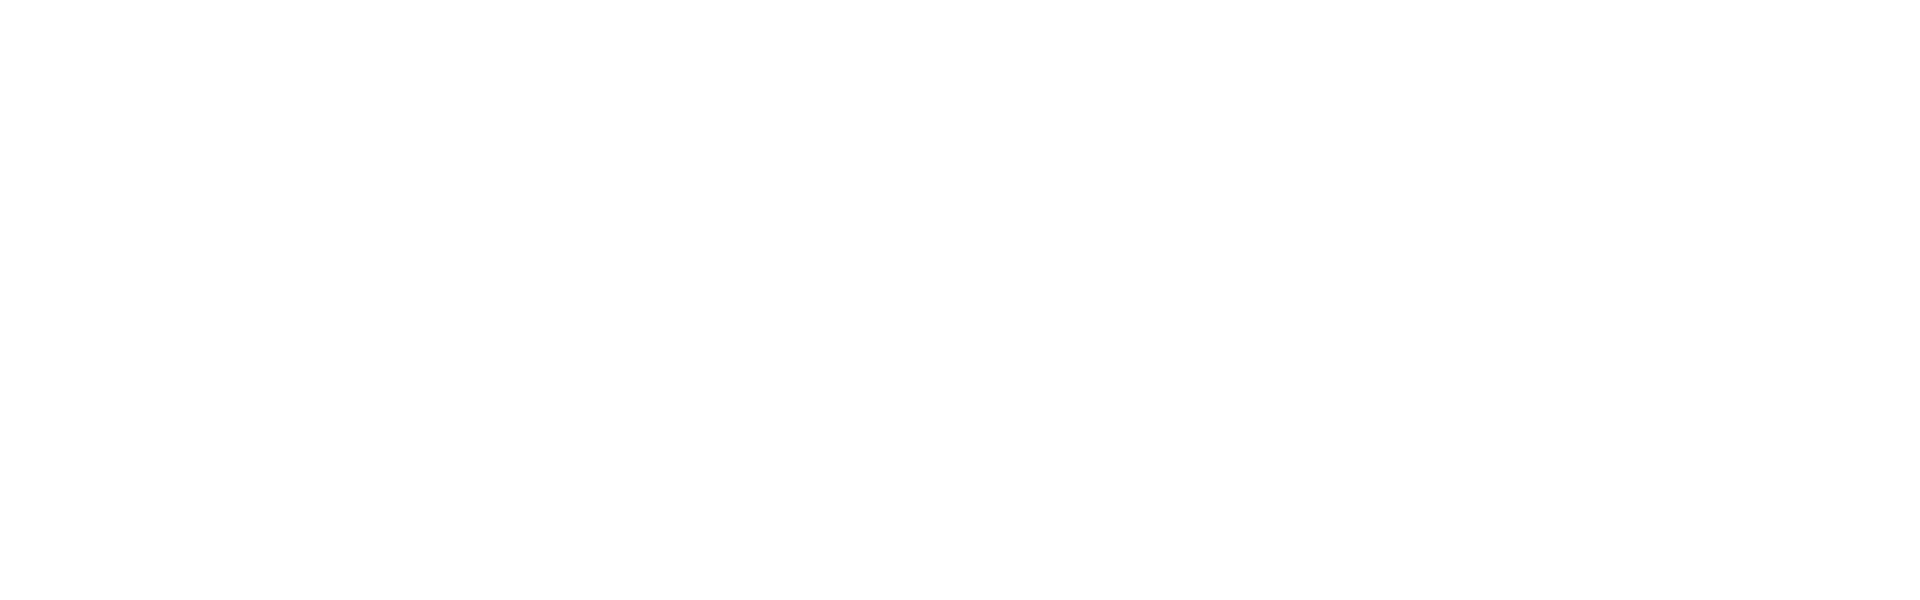 10+ Voxel Spaceships assets for free